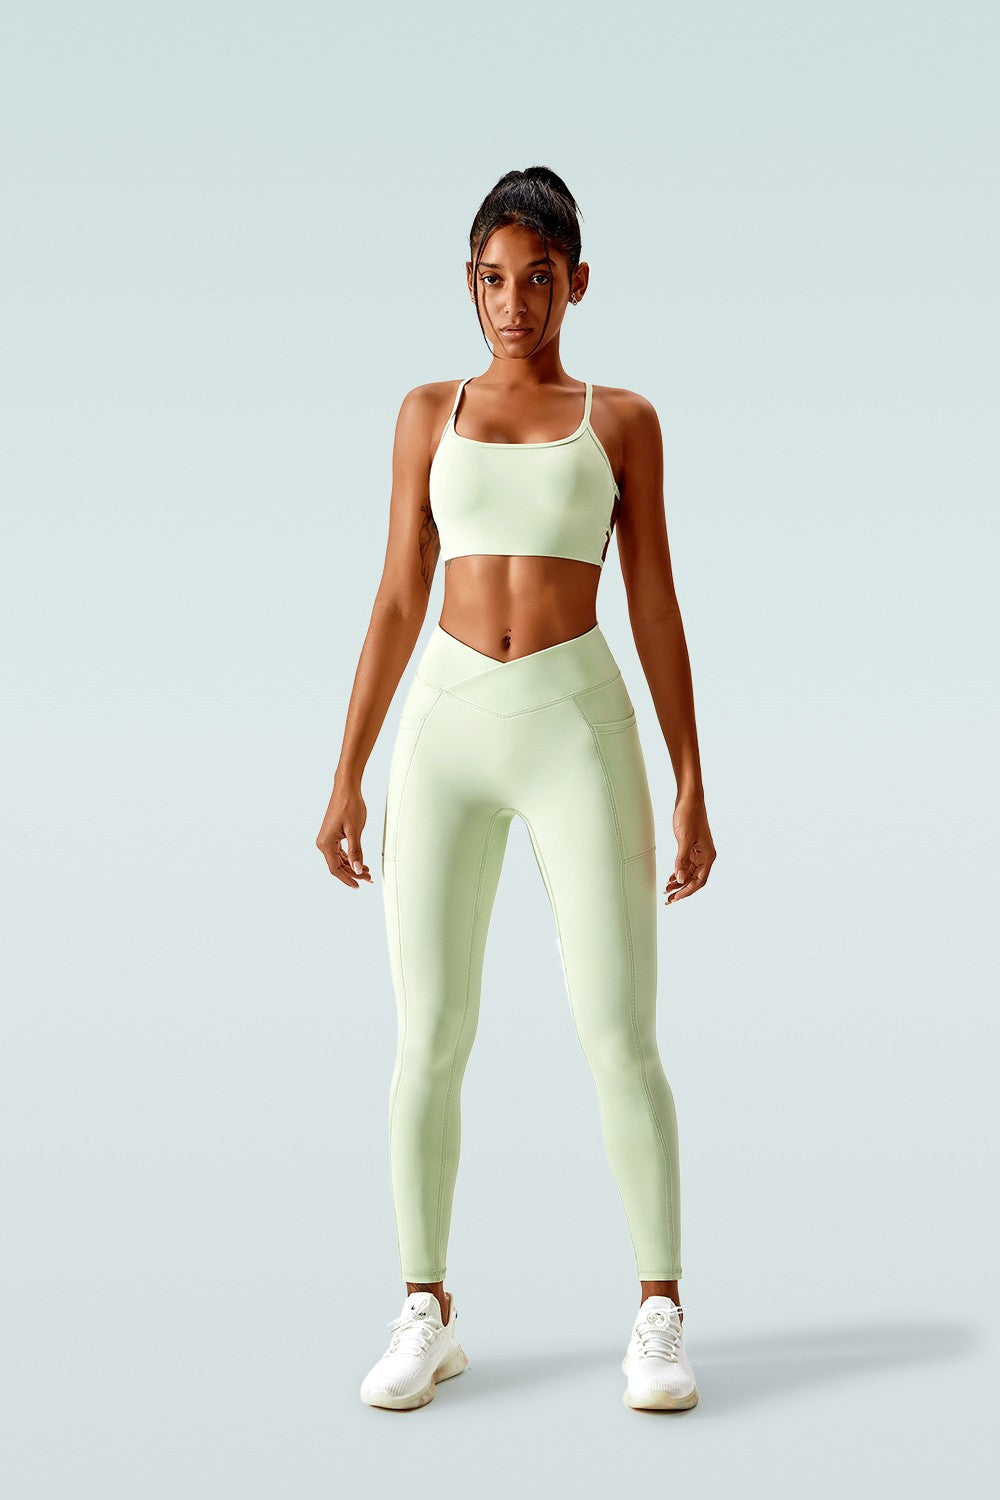 Premium Activewear & Athleisure Outfits For Powerful Women | Zioccie®